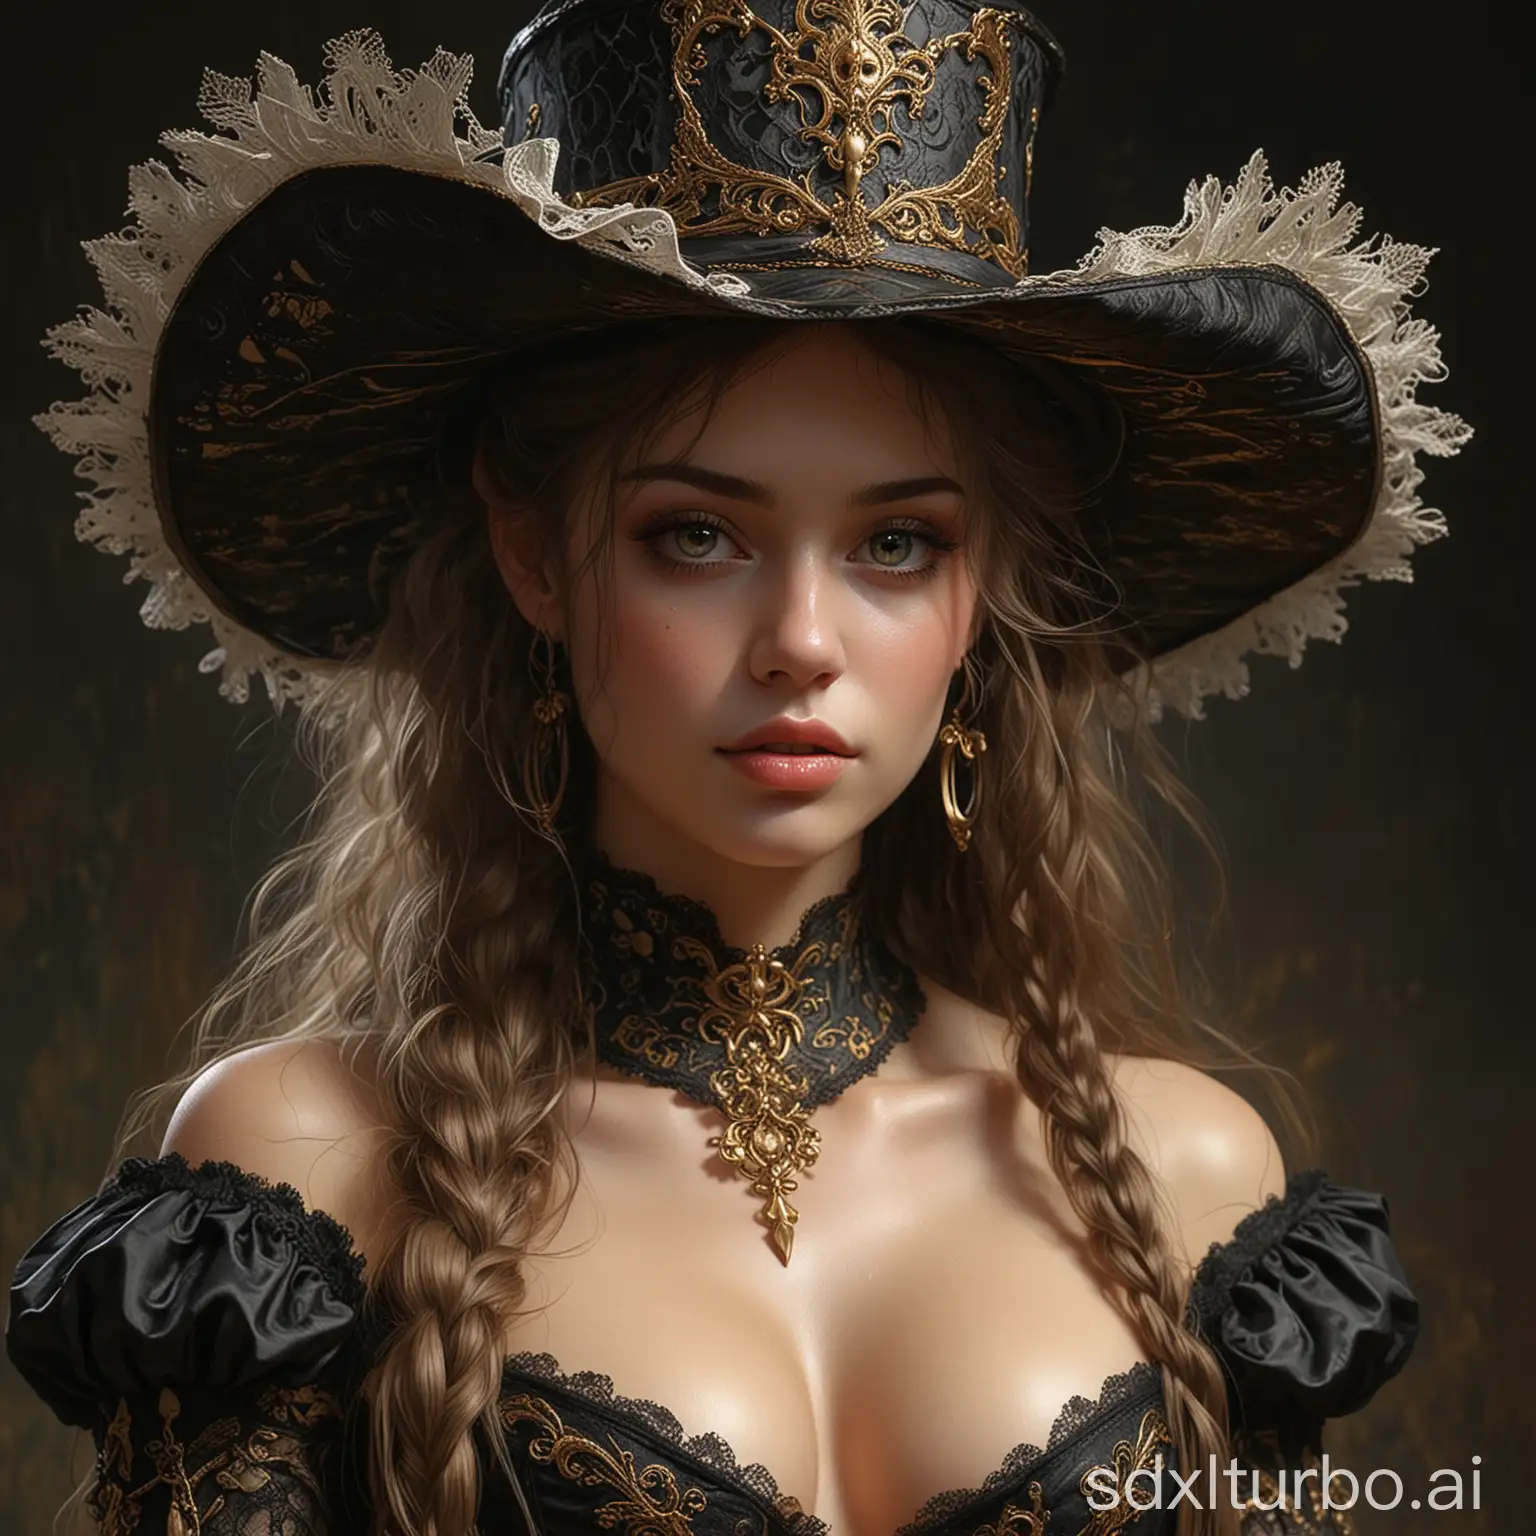 Surreal-Fantasy-Portrait-Enigmatic-Beauty-with-Reflective-Eyes-and-Elaborate-Attire